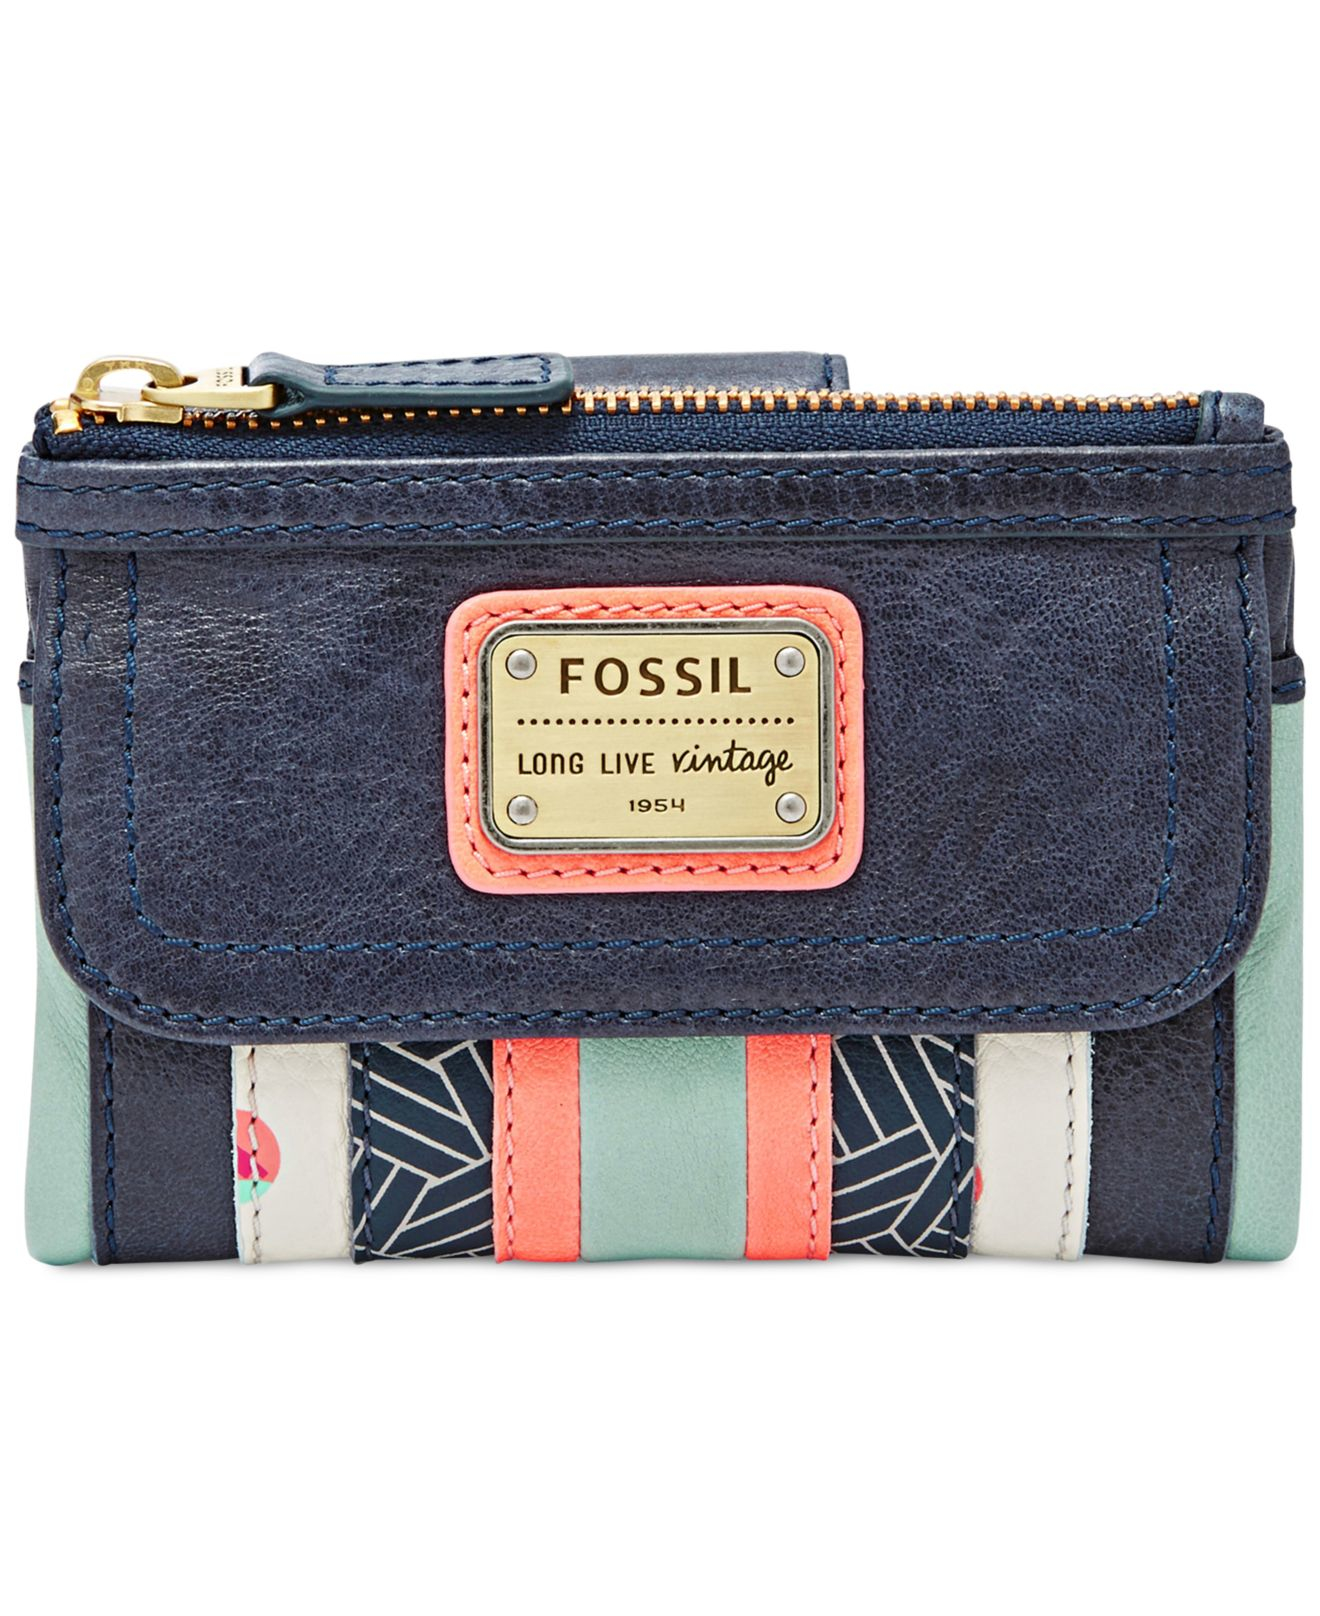 Fossil Emory Leather Wallet - Lyst